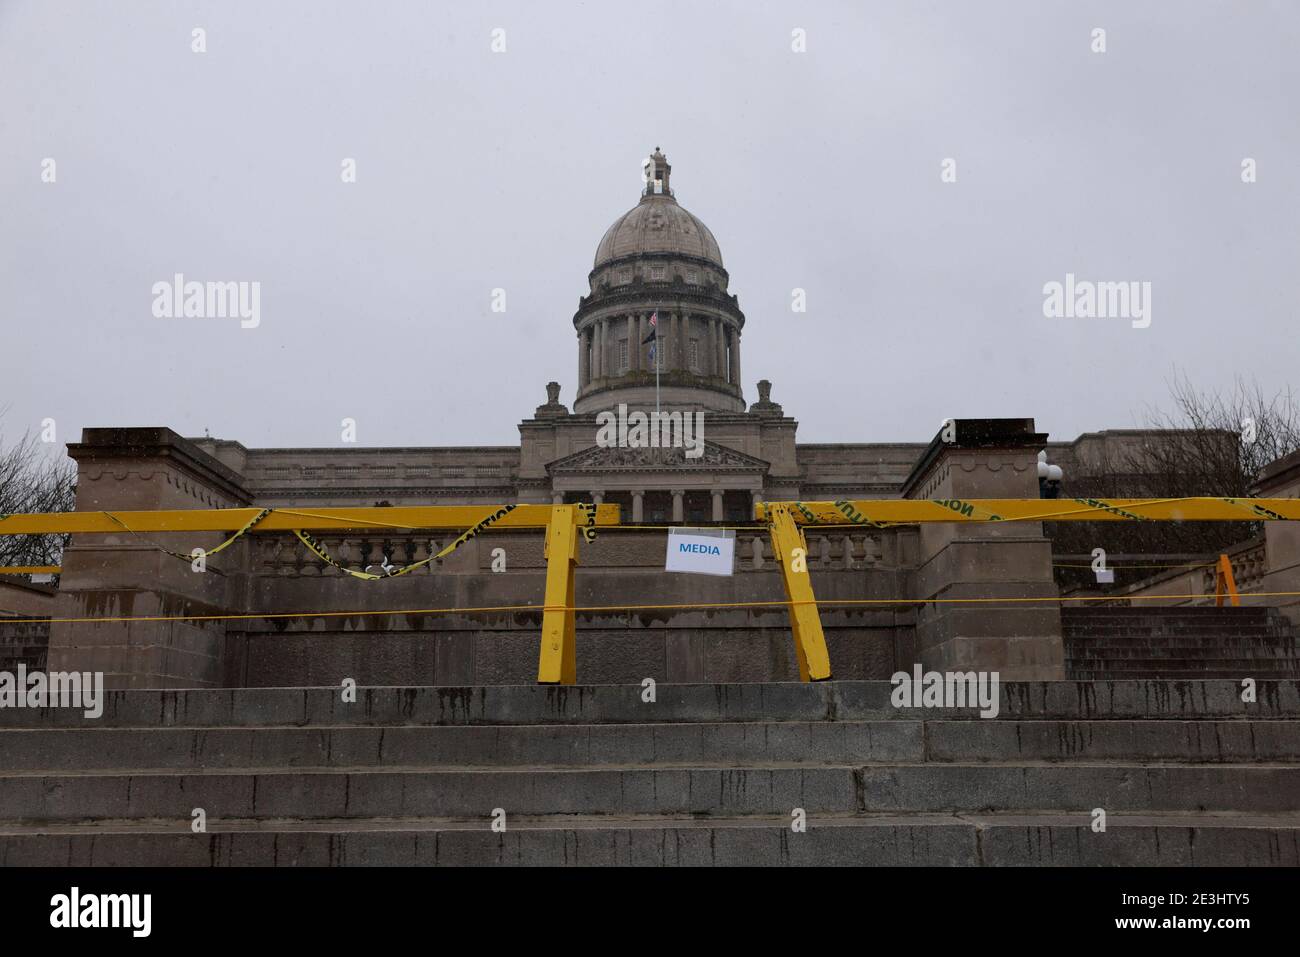 01162021- Frankfort Kentucky, USA: Barrier outside the Kentucky statehouse on a snowy day before planned protests before the Biden inauguration, January 16, 2021. The Statehouse will be blocked off by security Sunday when armed protesters angry about the loss of Donald Trump to Joe Biden are expected to arrive. Washington D.C. and statehouses across the United States are on through at least inauguration day. Stock Photo